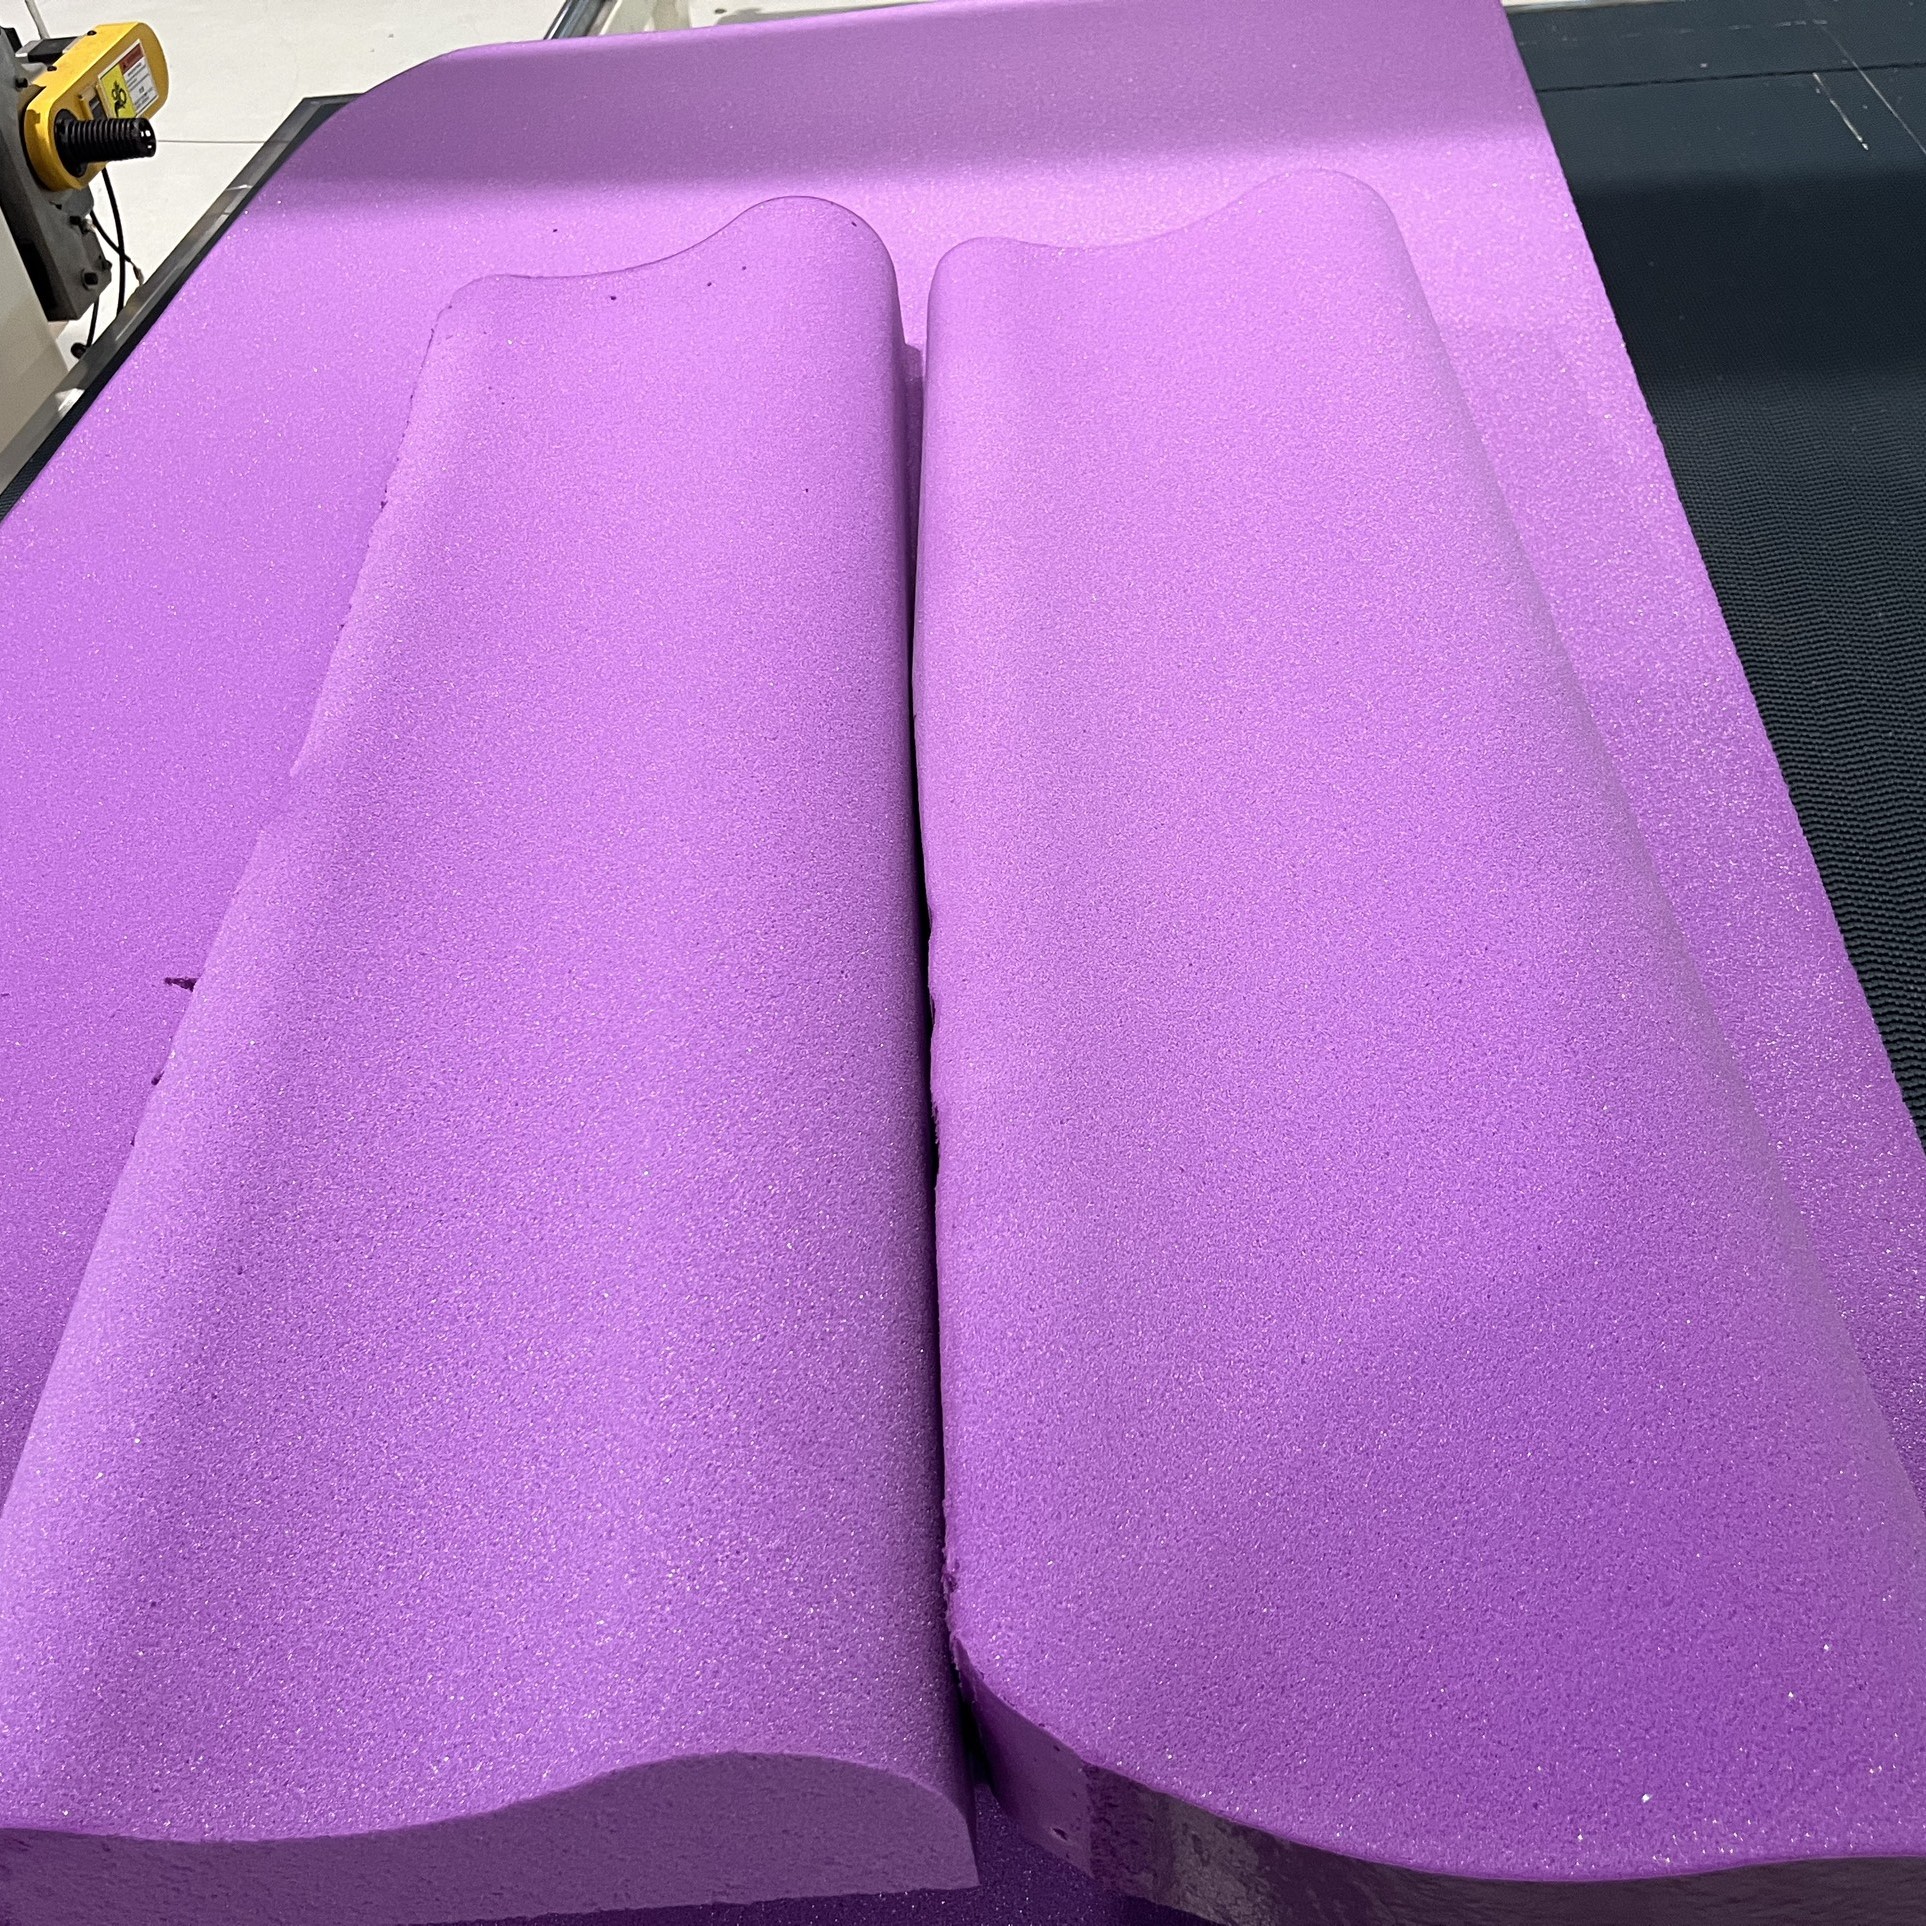 Polyurethane Foam Furniture Fast Delivery PU Foam Soft Products Material Resistant Shock Proof Shorten Production Time Vietnam 8